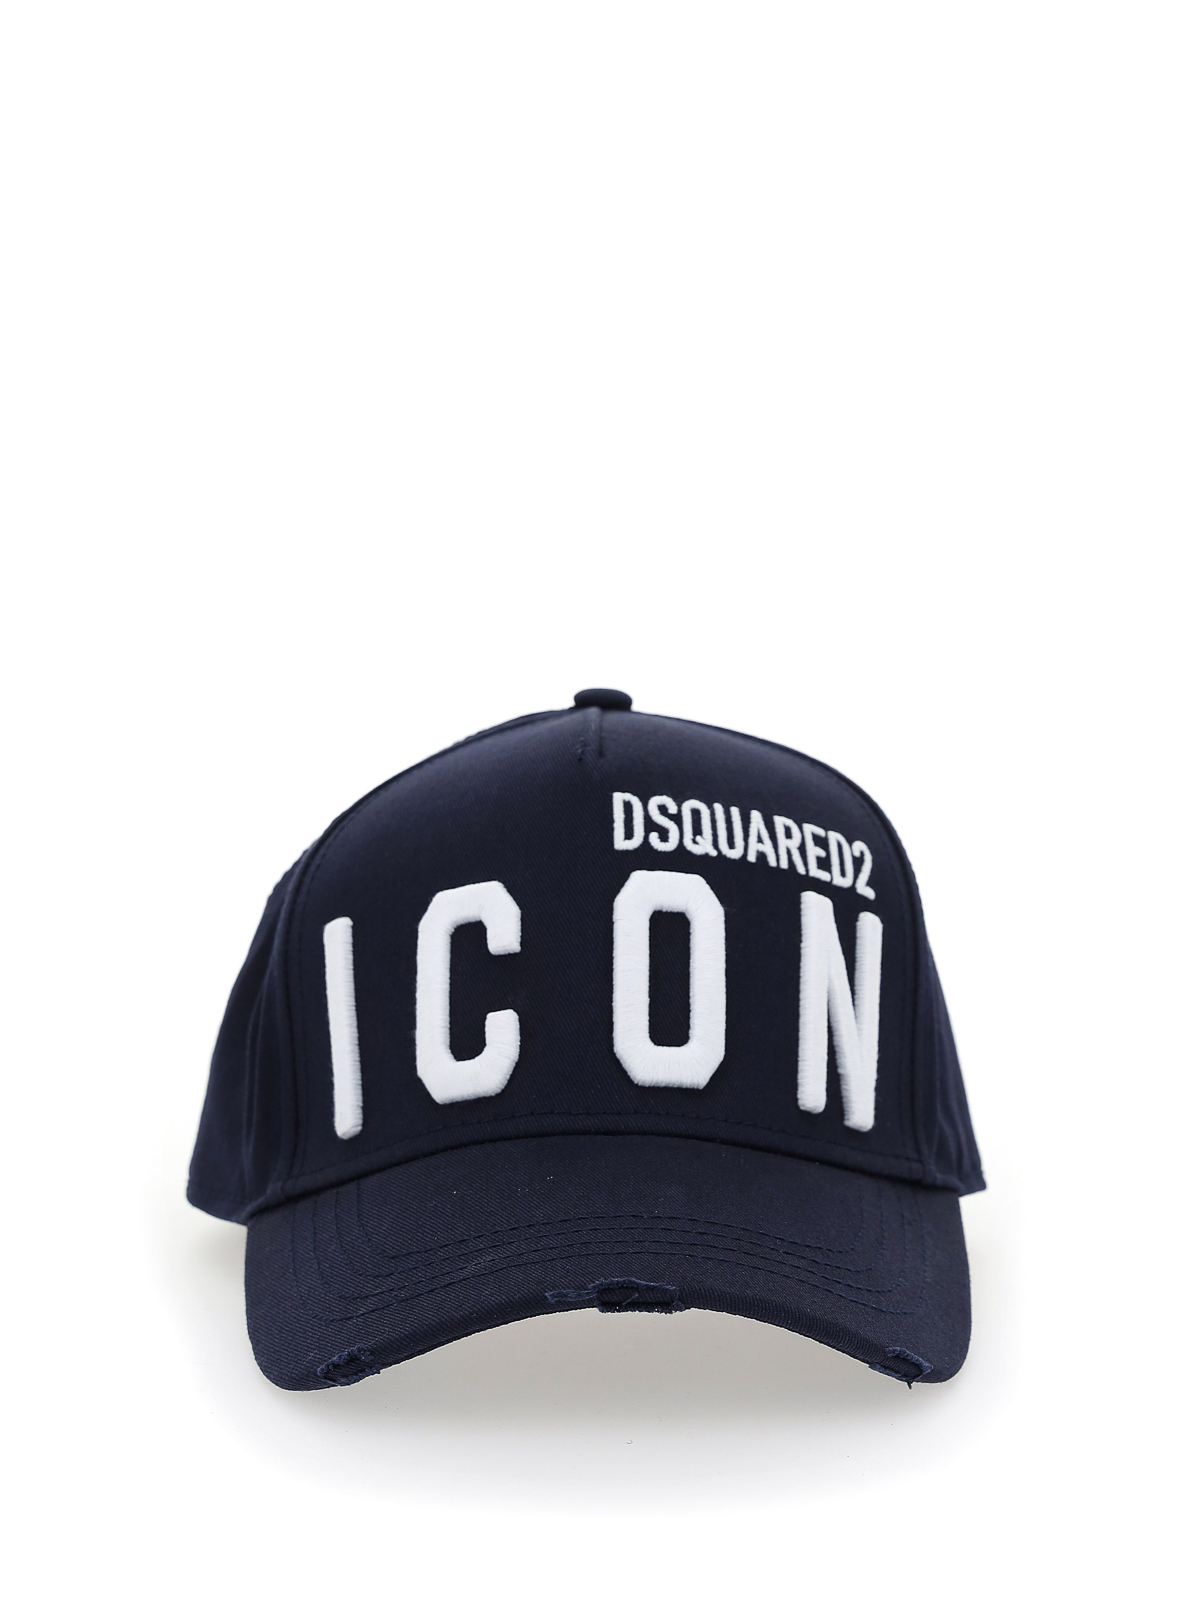 Hats and caps Dsquared2 - Icon baseball hat